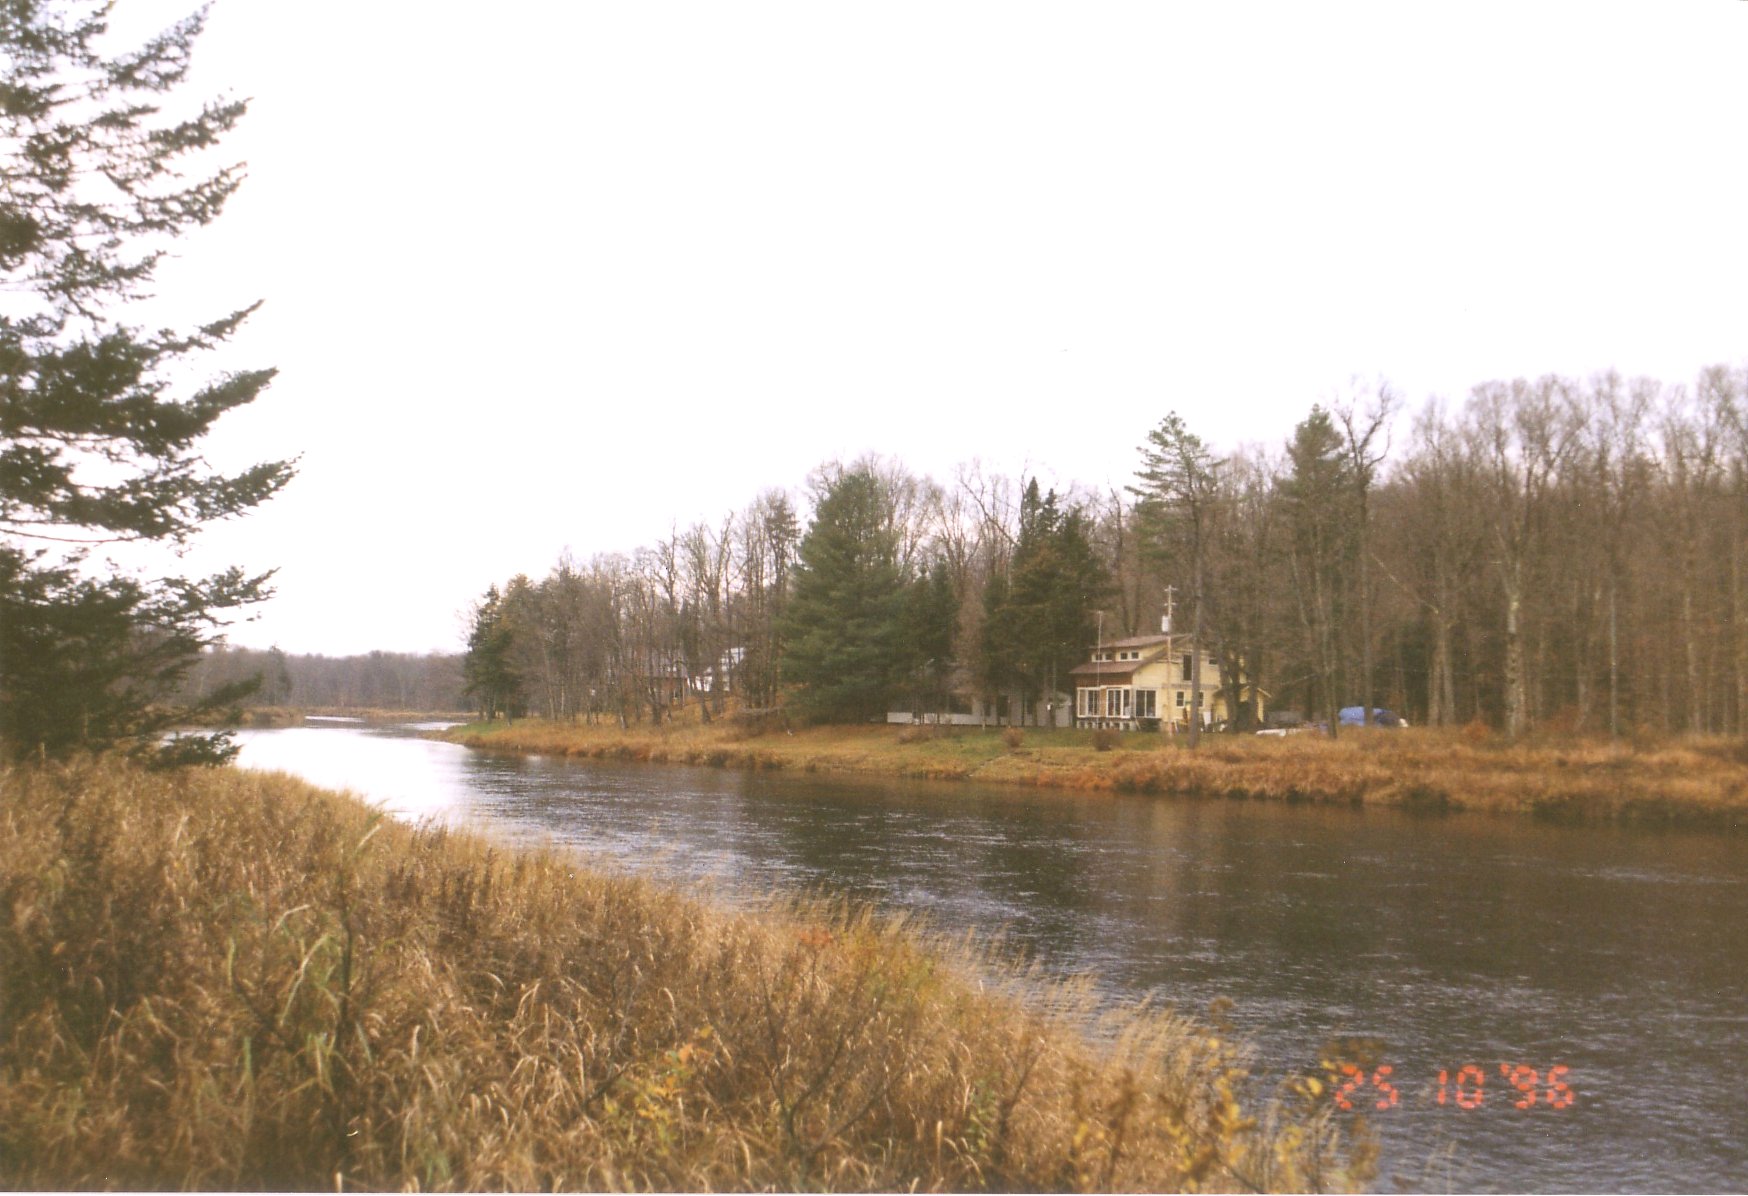 Photograph of the Moose River at McKeever, NY (MCKN6)